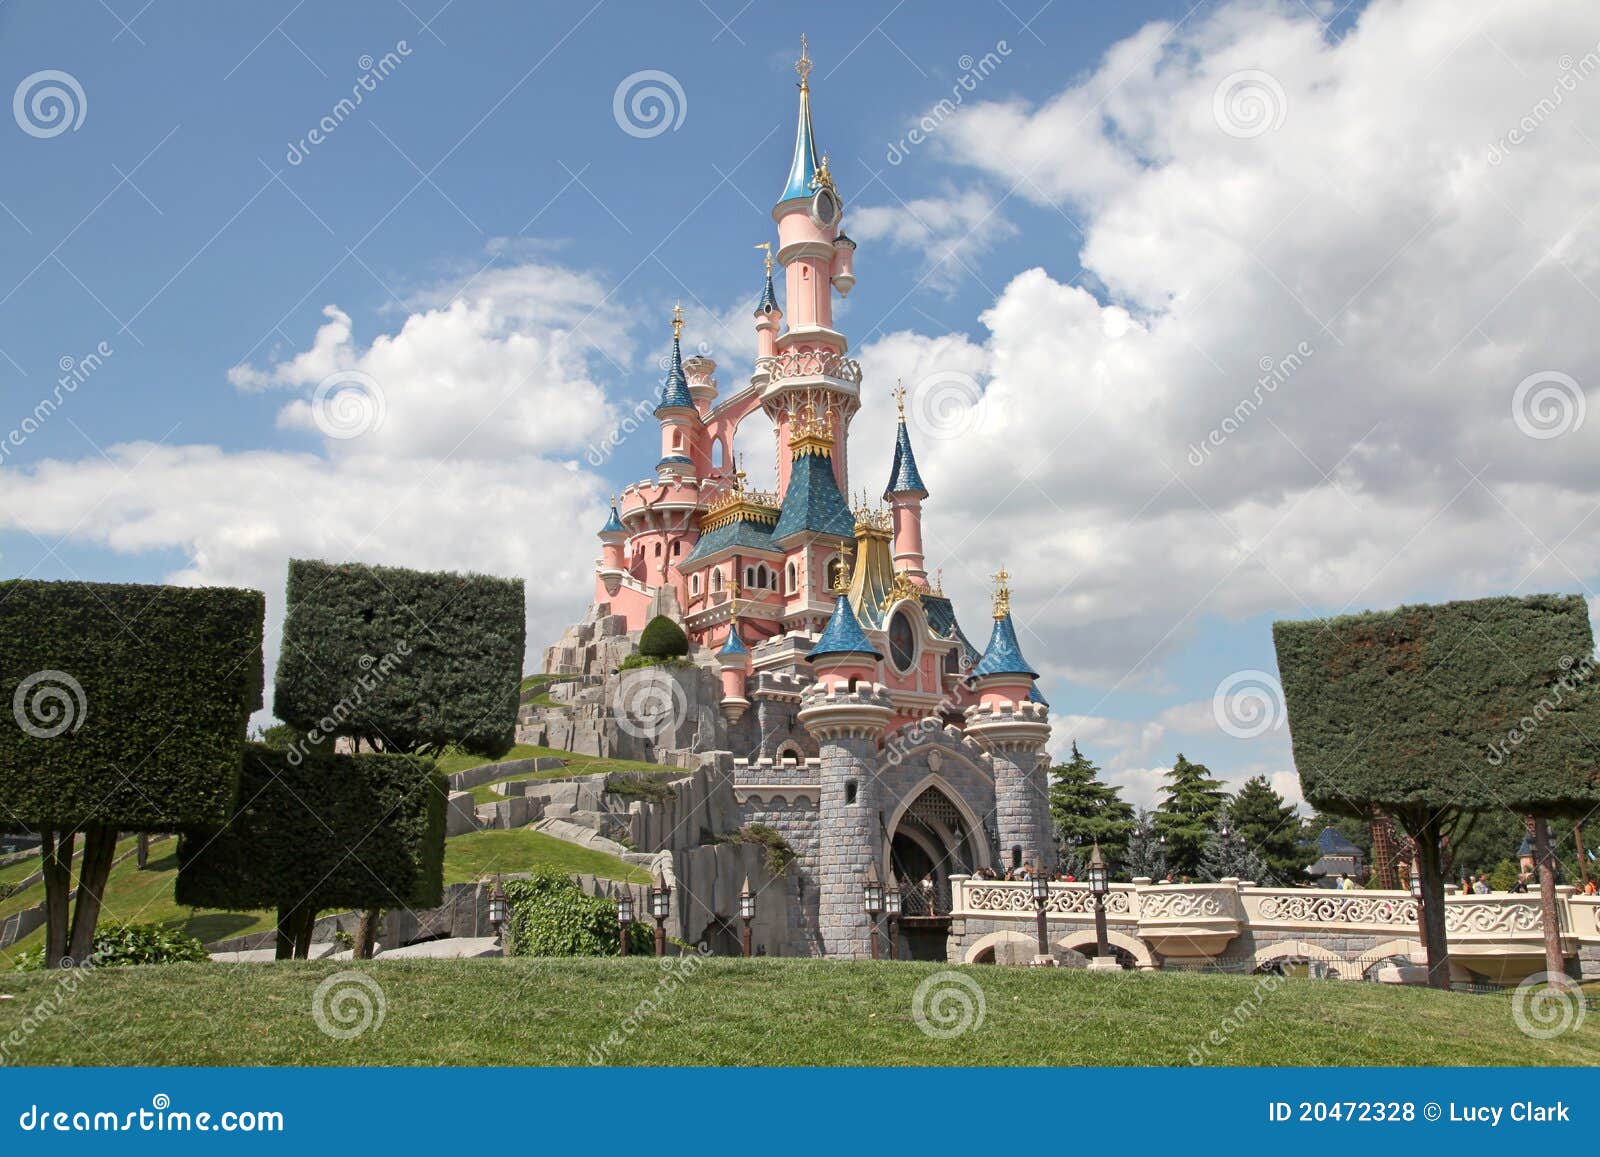 Disneyland Paris Castle at Night with Christmas Decorations Editorial Photo  - Image of chateau, christmas: 58790536